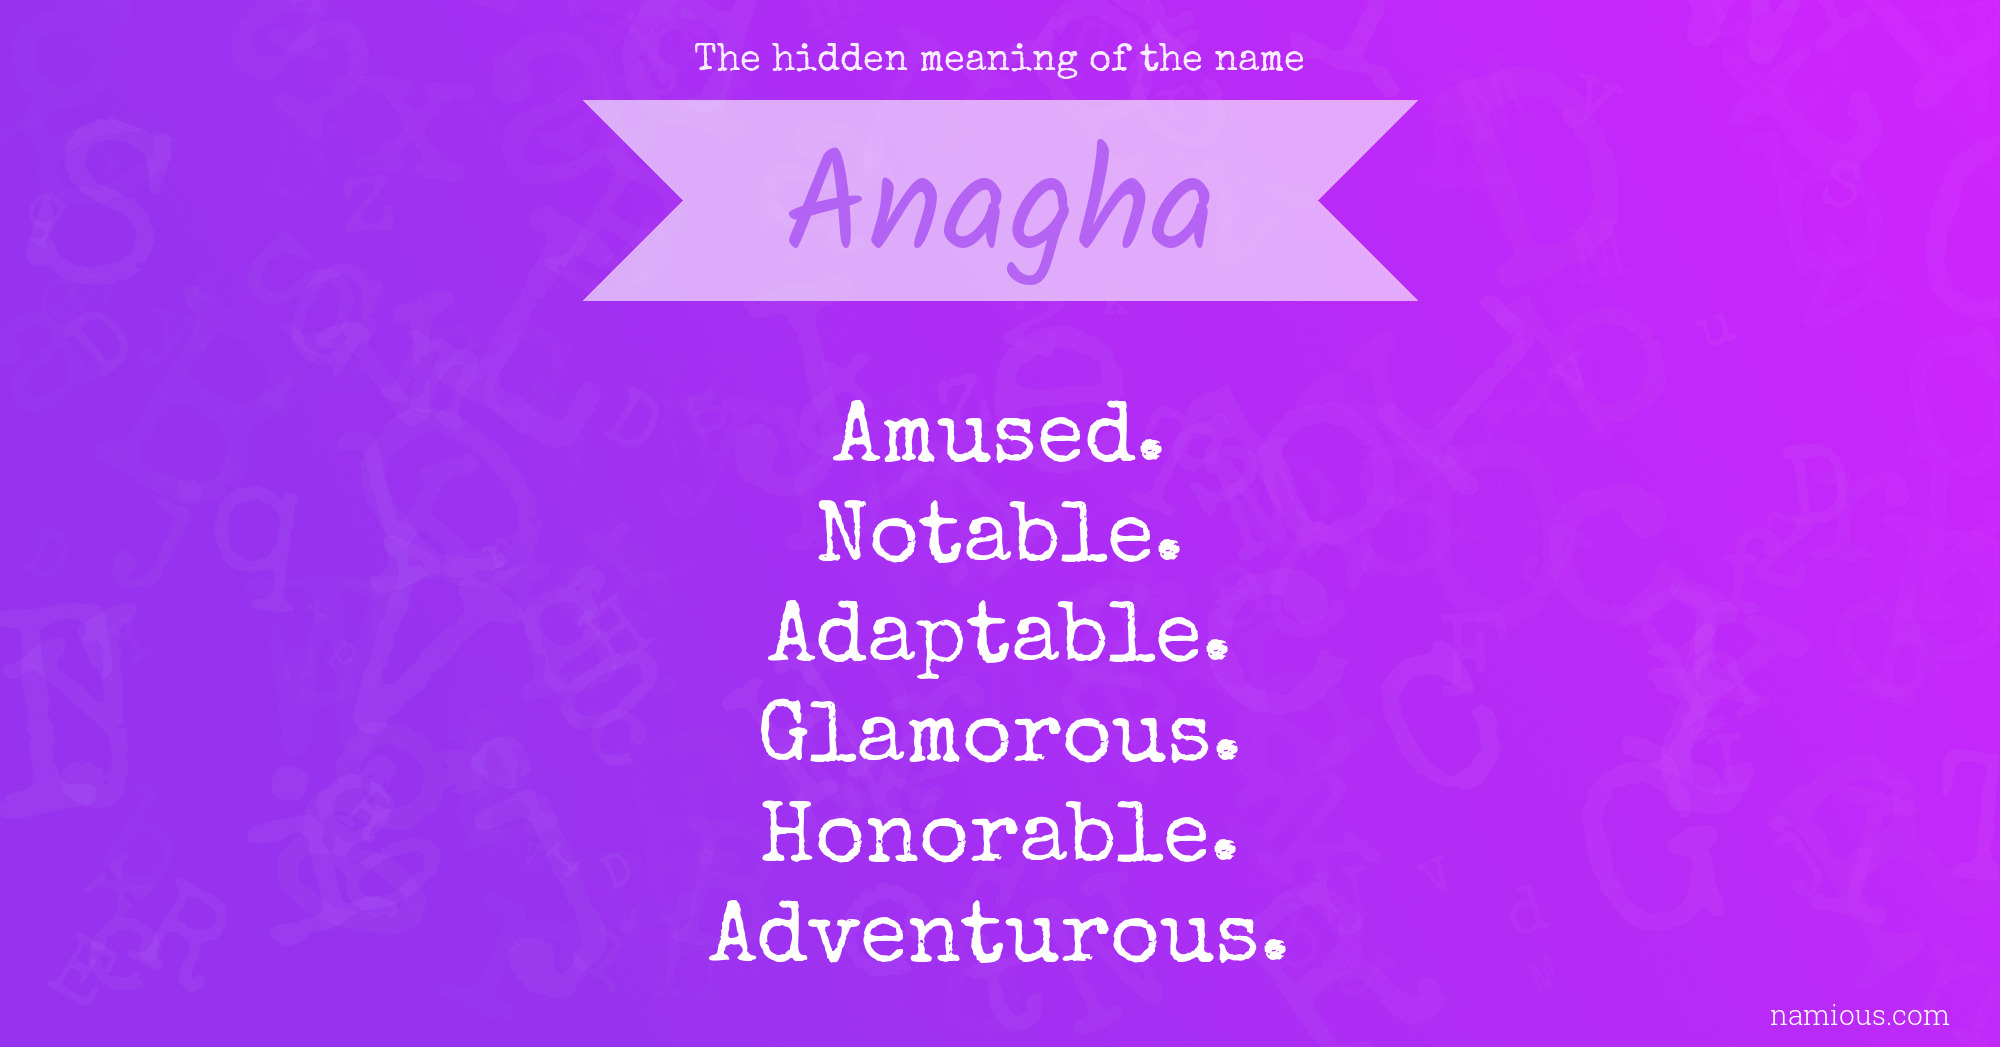 The hidden meaning of the name Anagha